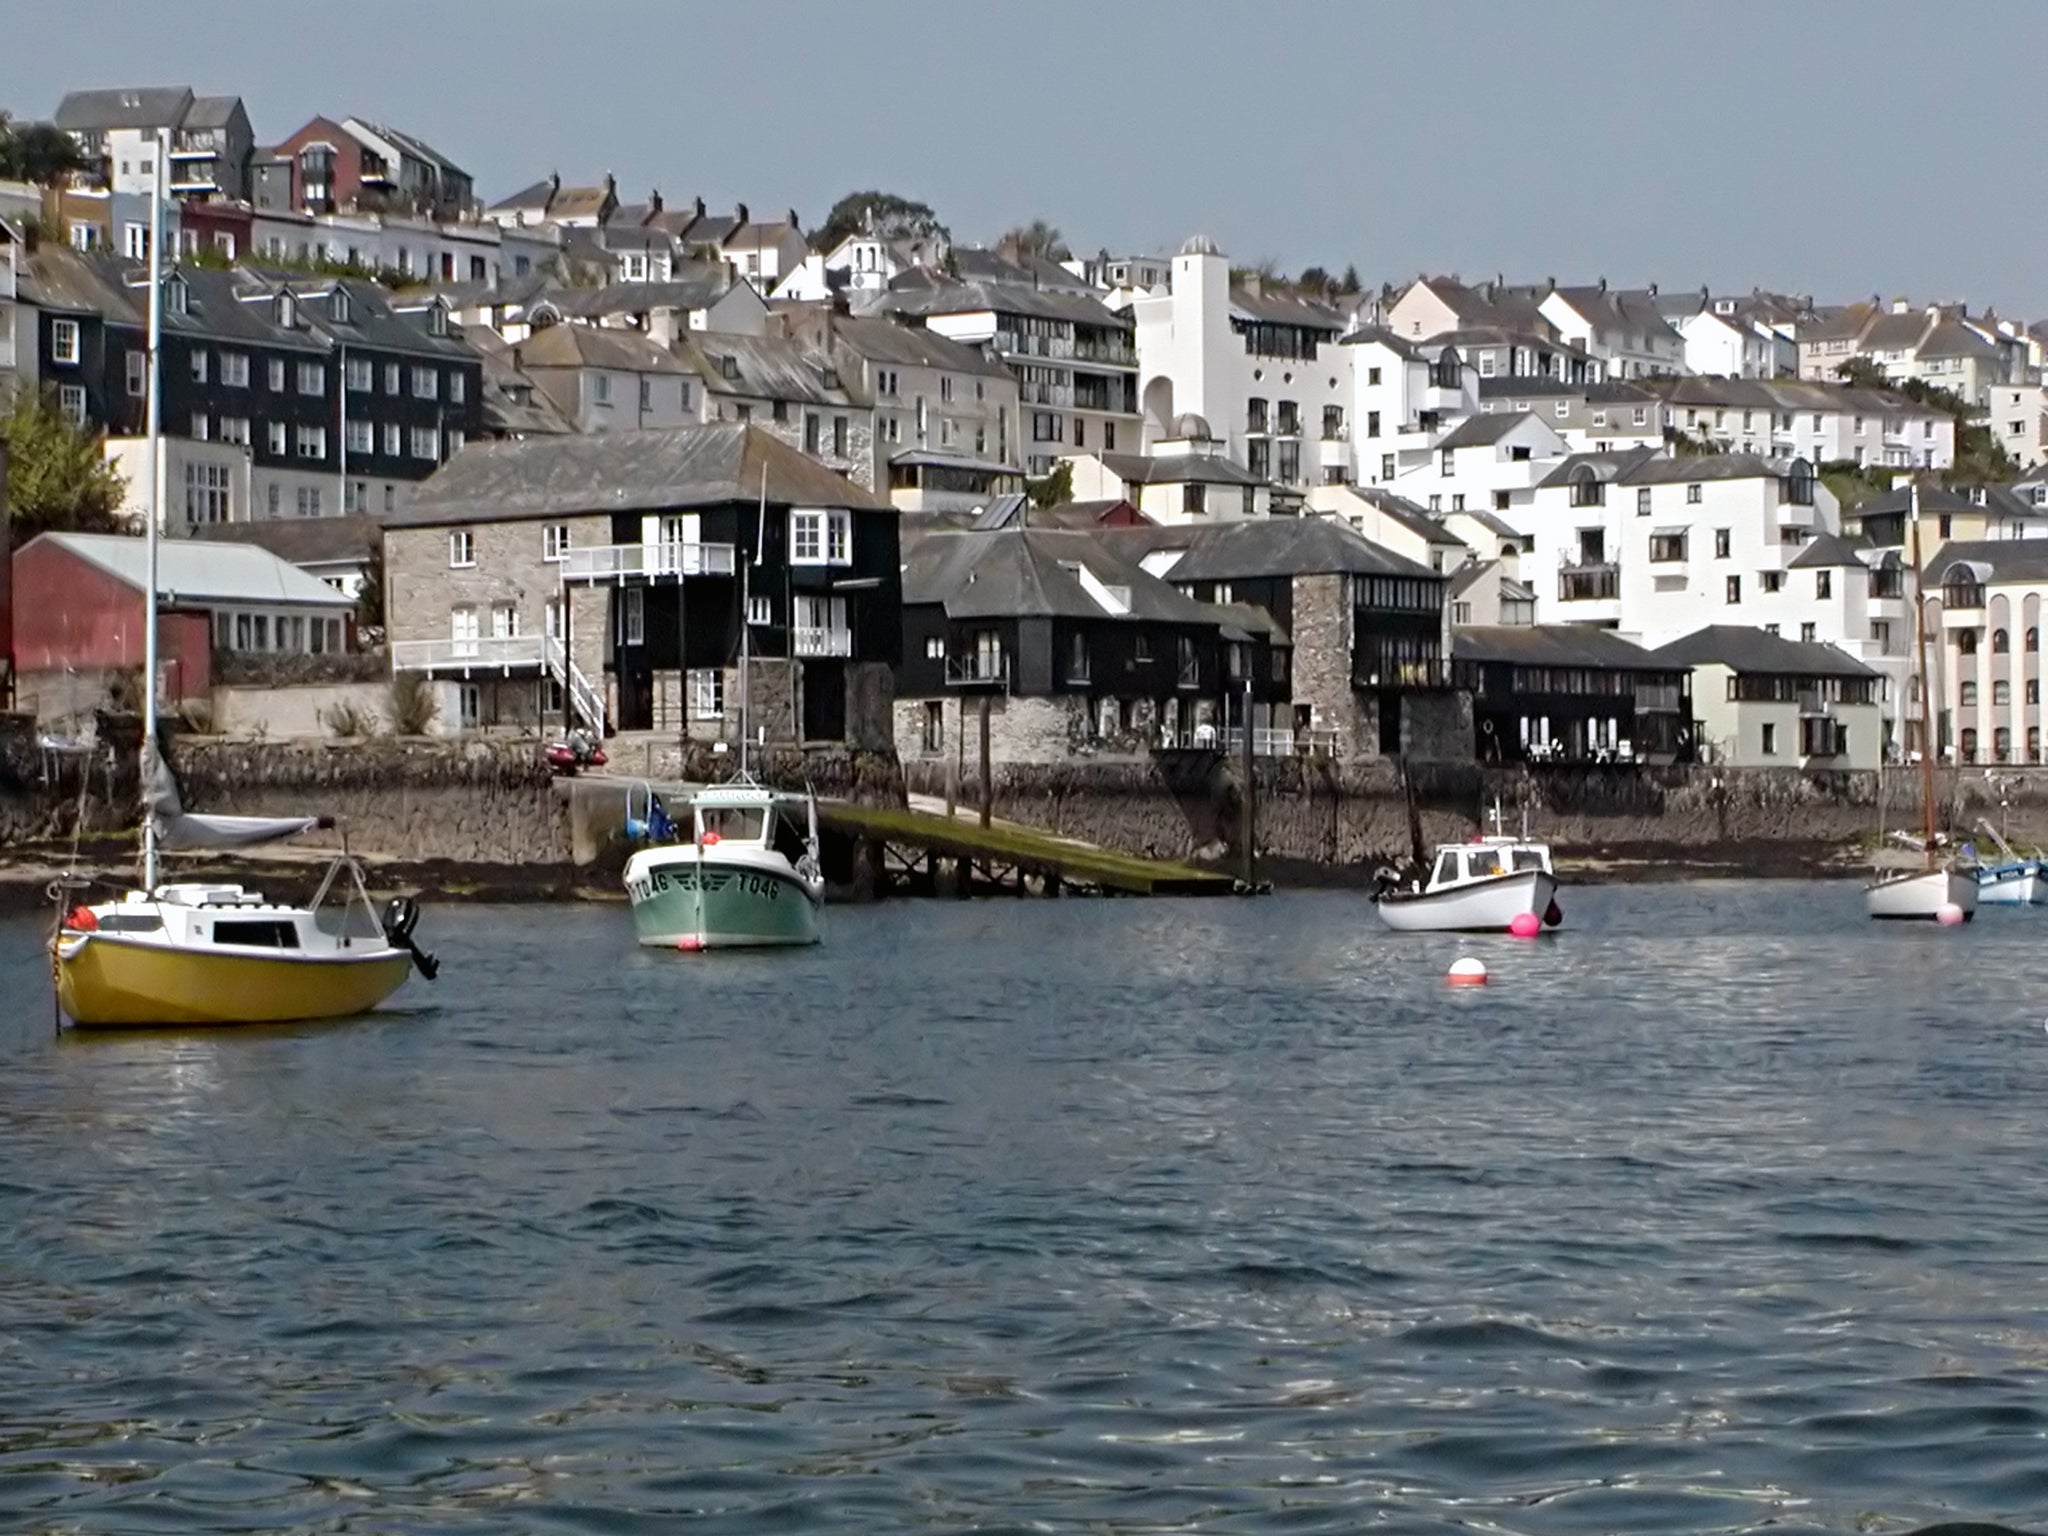 St Ives in Cornwall. The county voted decisively to leave the EU